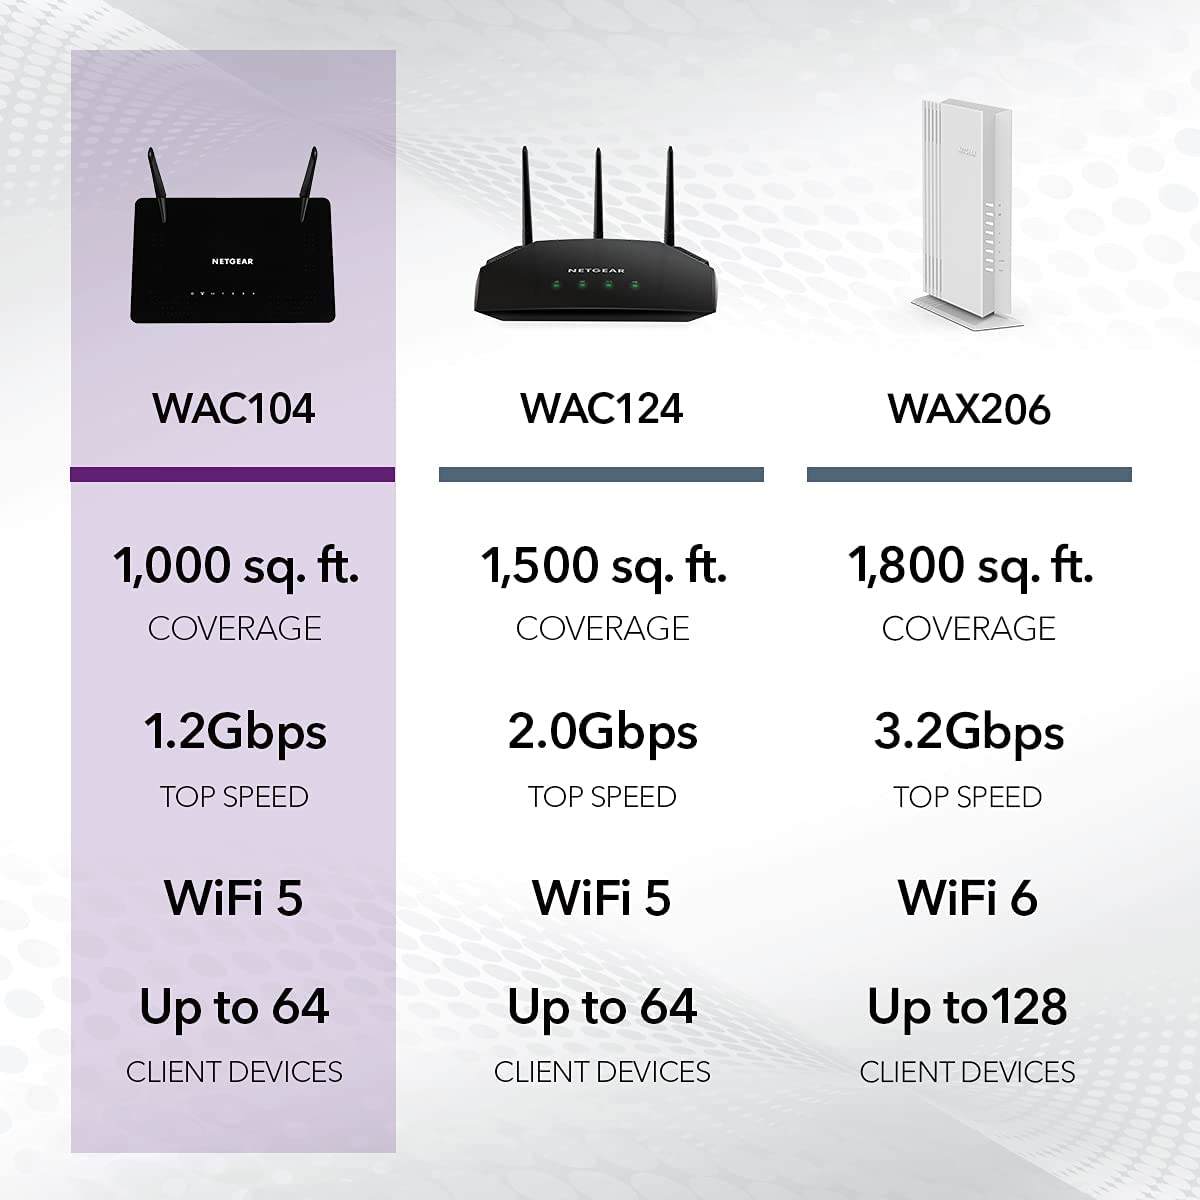 NETGEAR Wireless Desktop Access Point (WAC104) - Wifi 5 Dual-Band AC1200 Speed | 3 X 1G Ethernet Ports | up to 64 Devices | WPA2 Security | Desktop | MU-MIMO | Supports 3 Ssids | 802.11Ac